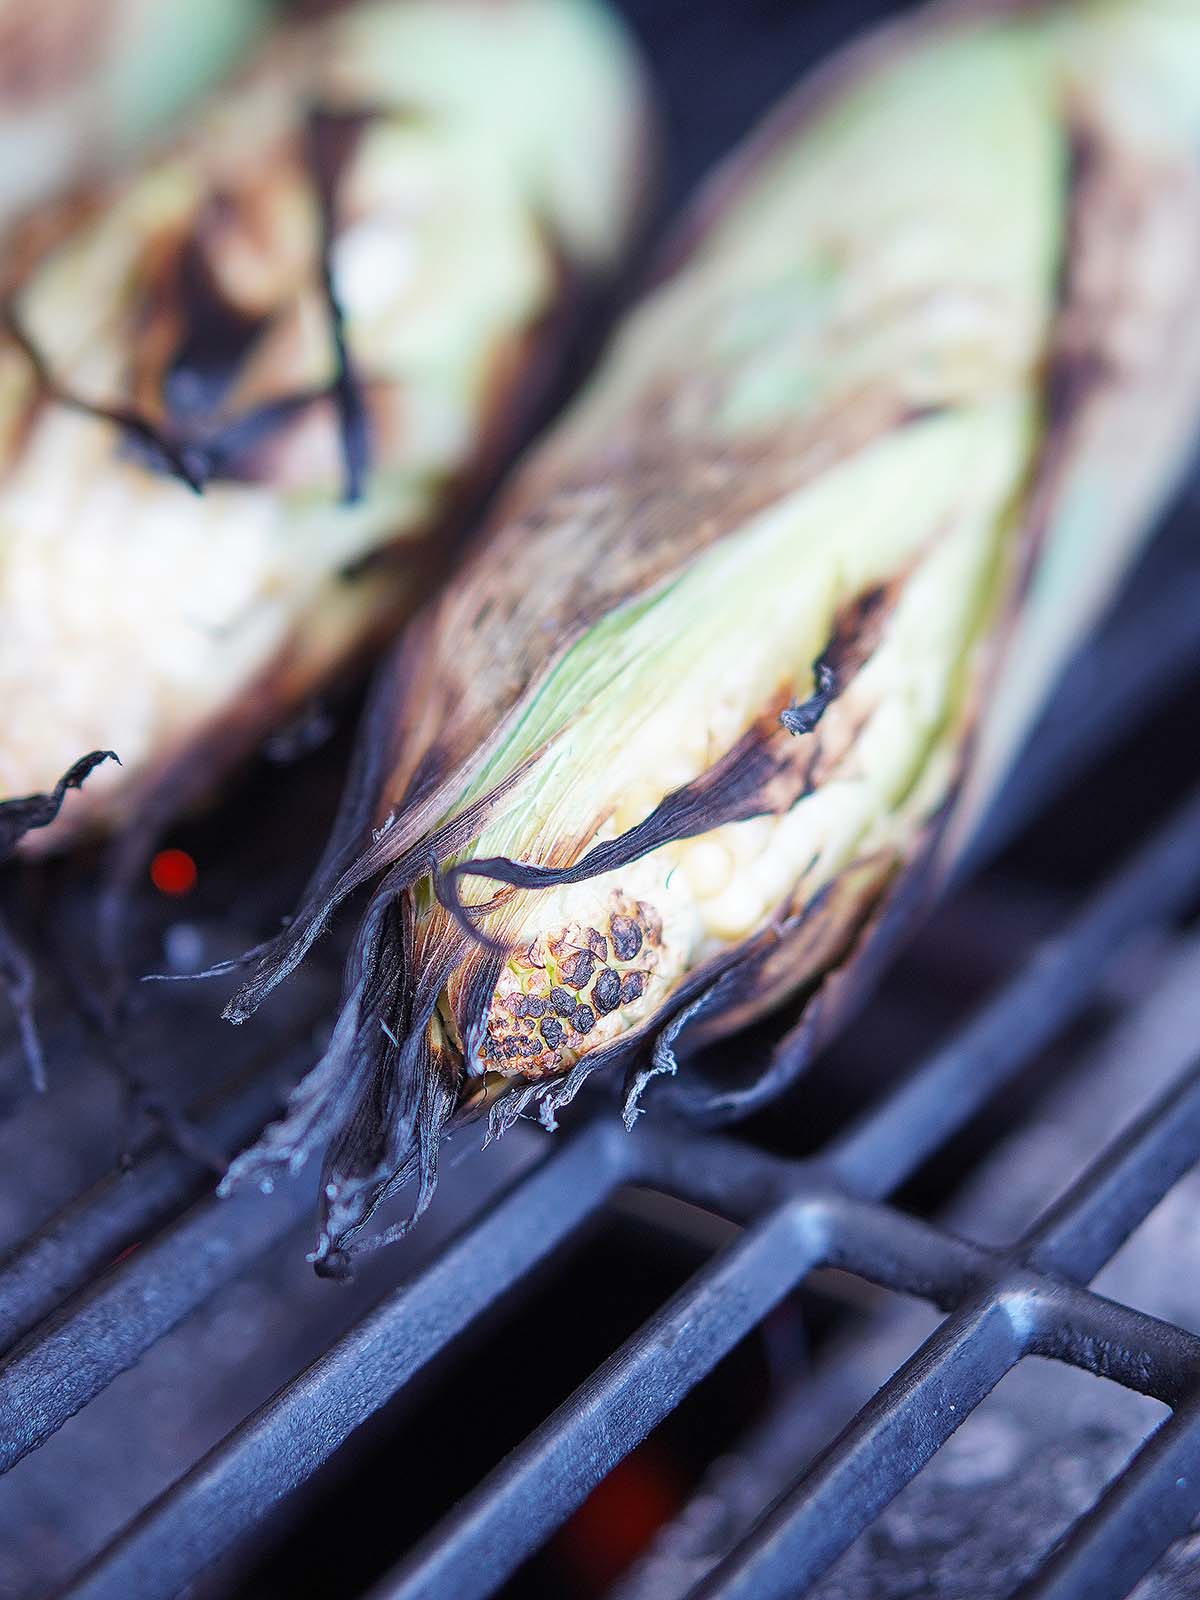 Two grilled corn on the cob with charred husk on the grill.